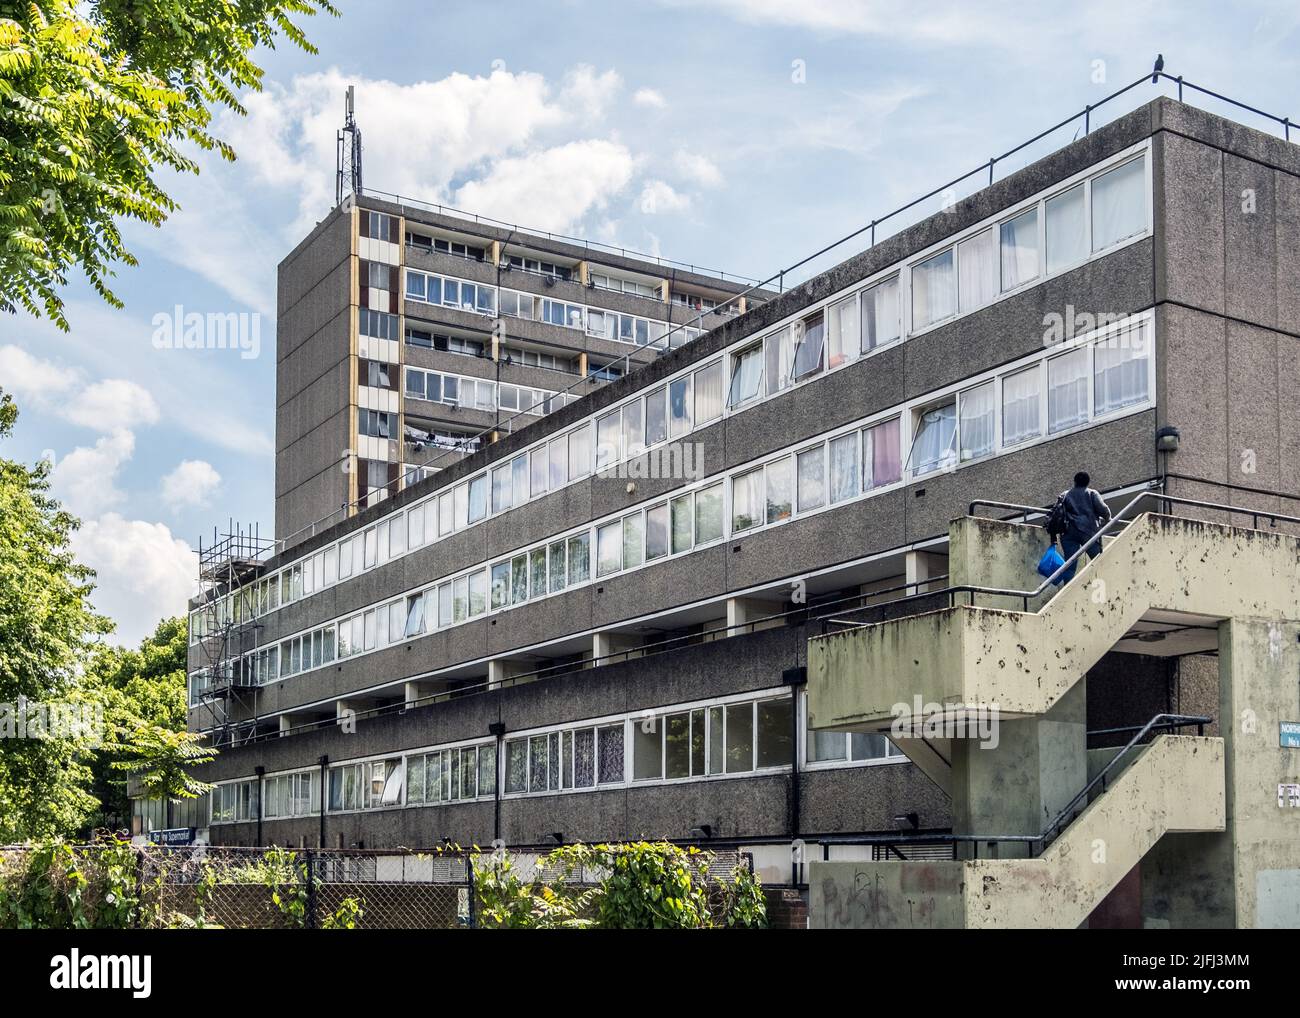 Council flats in the Aylesbury Housing Estate in Walworth, South London, England, UK. Stock Photo